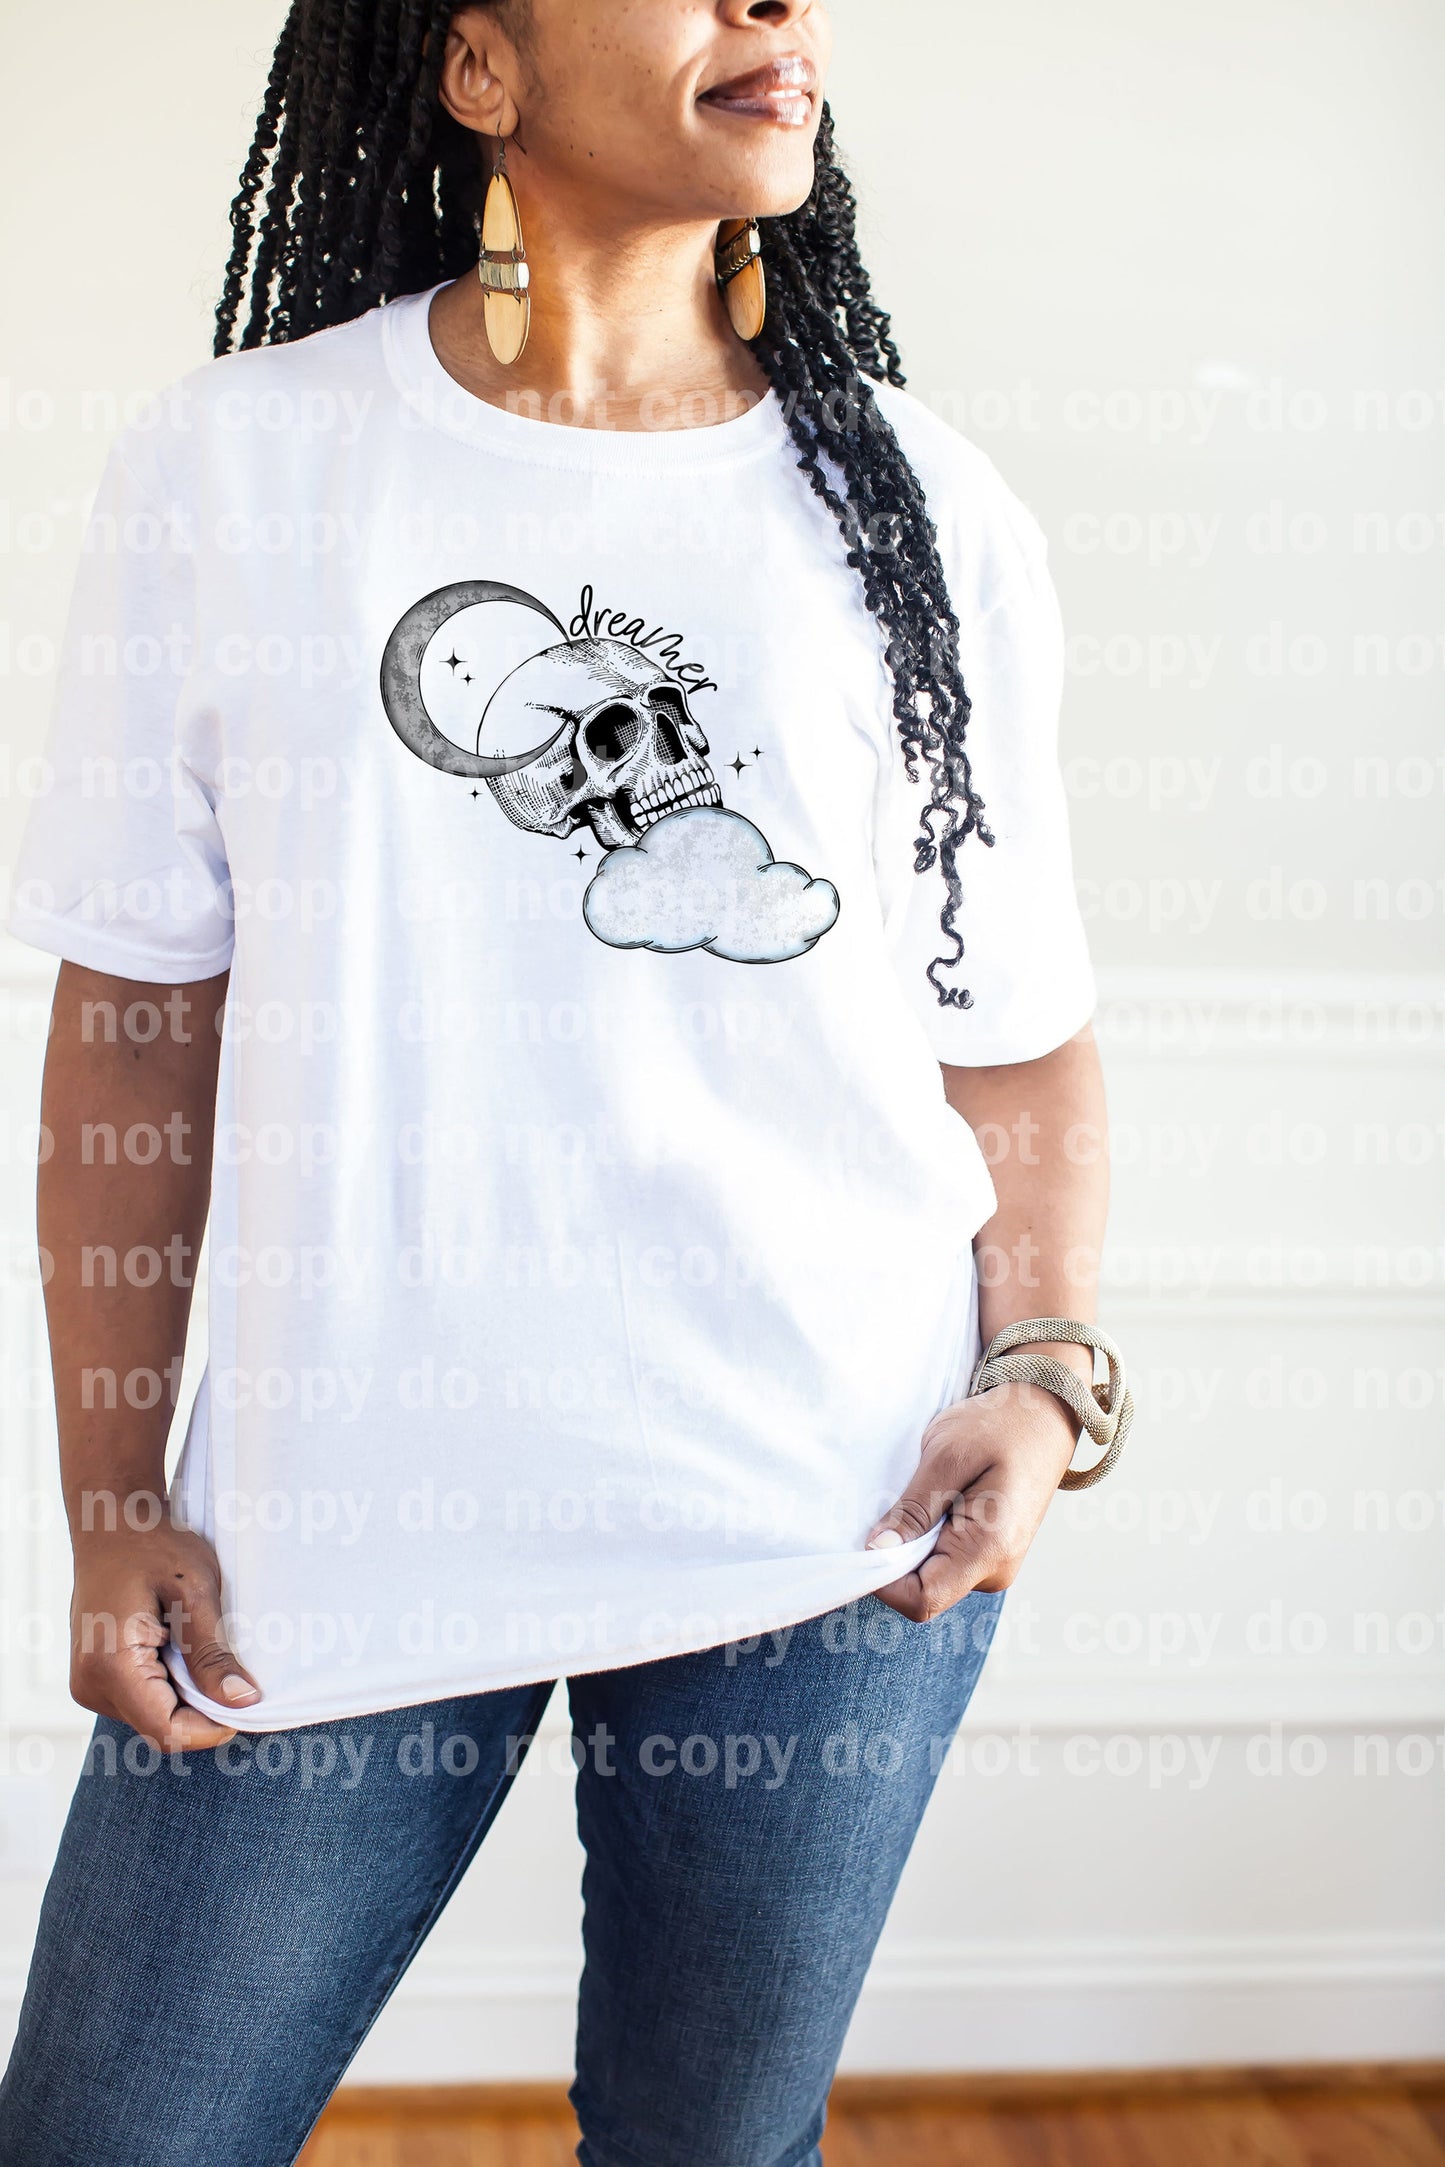 Dreamer Typography Full Color/One Color Dream Print or Sublimation Print